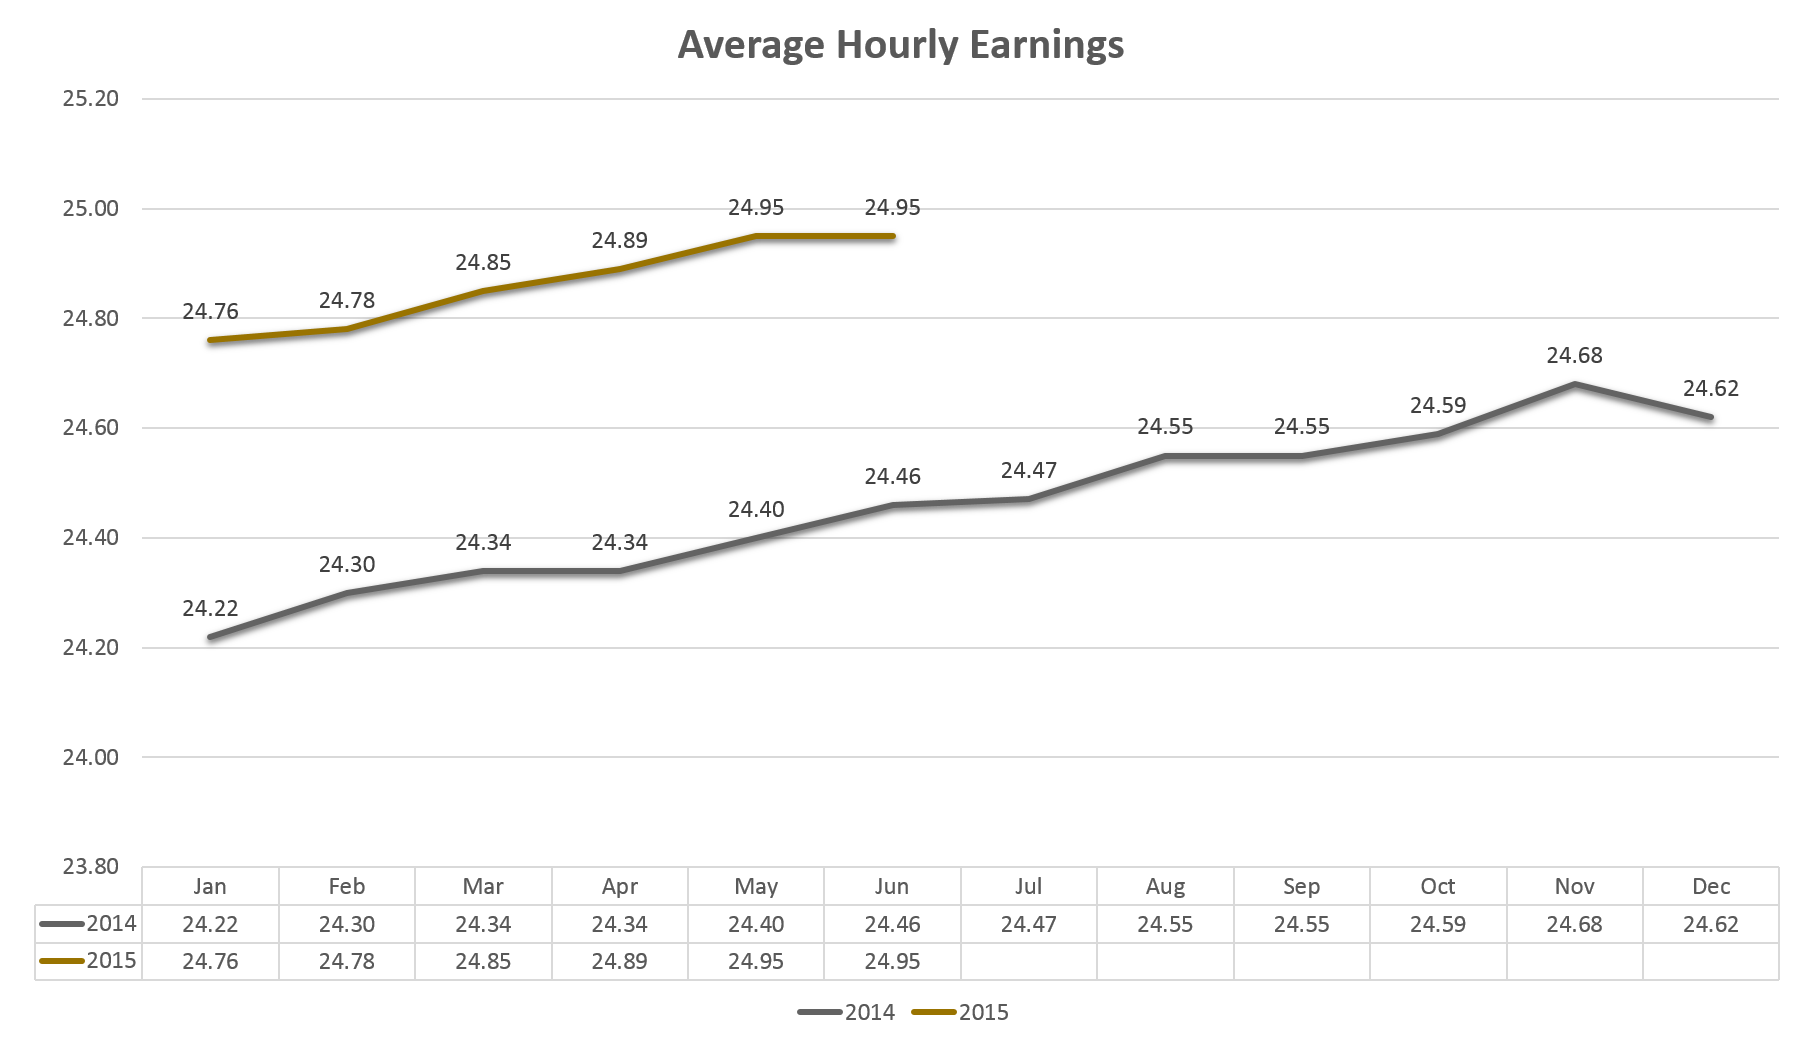 Average Hourly Earnings - 2014 to Present